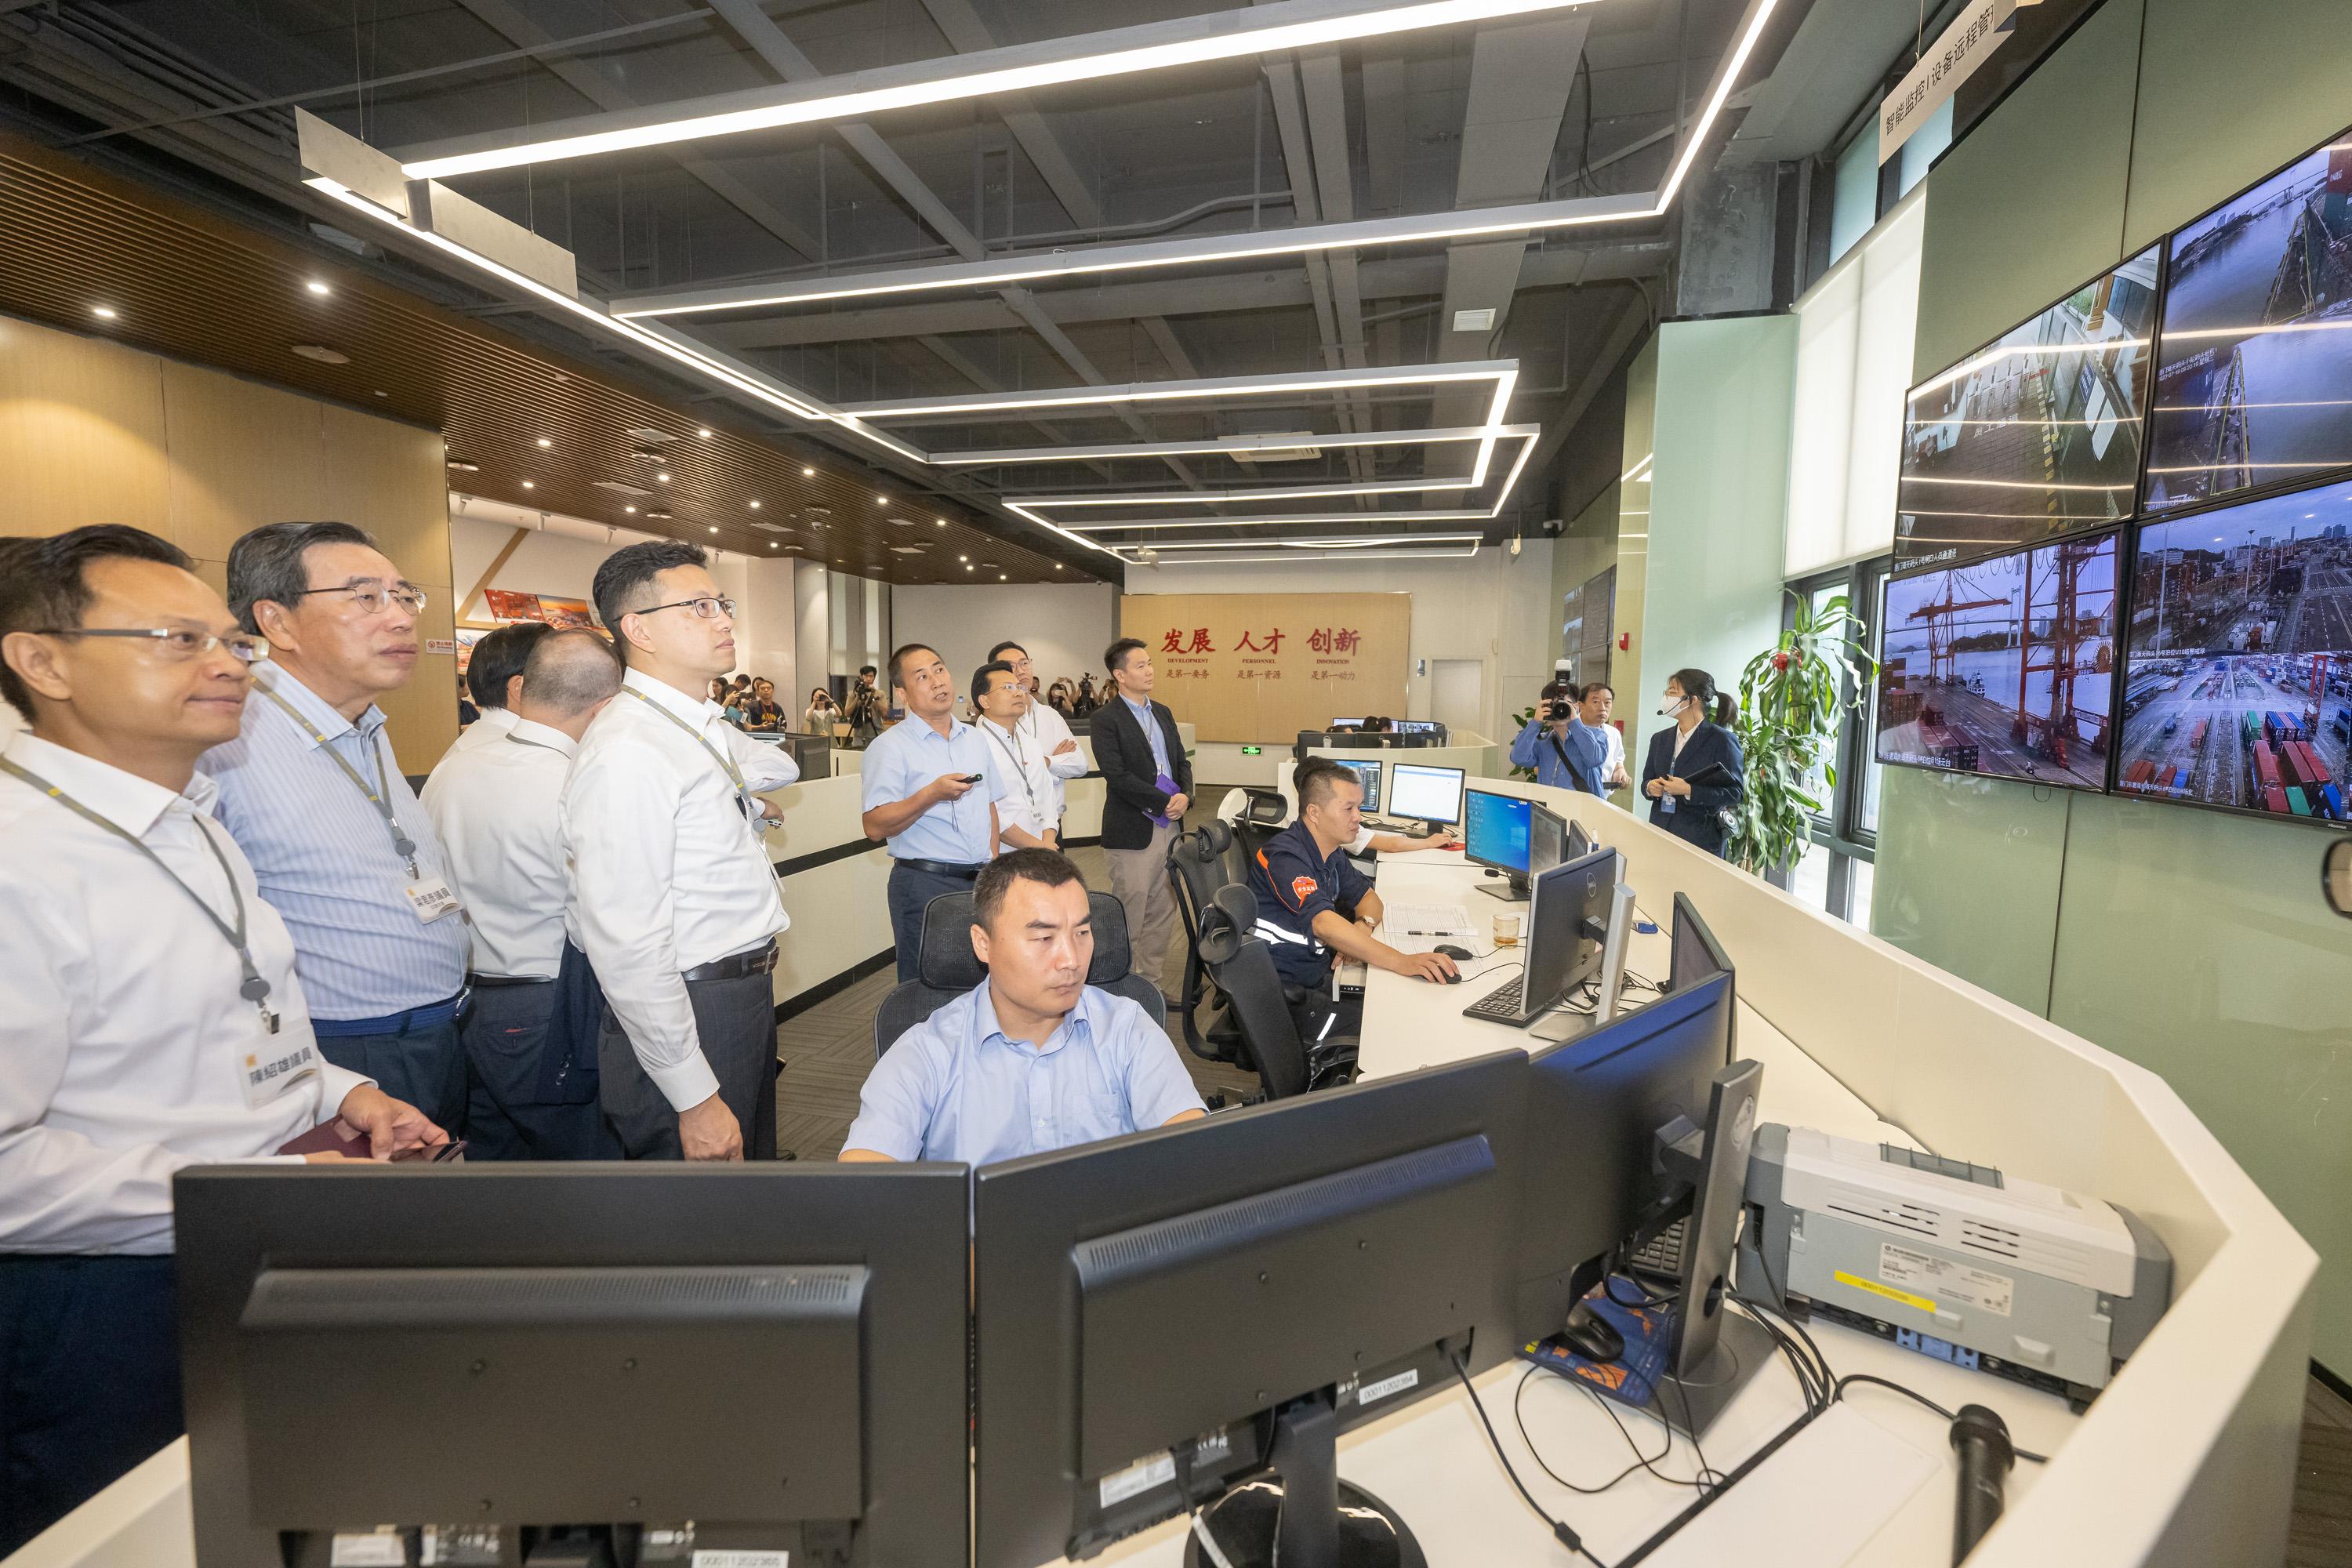 The delegation of the Legislative Council (LegCo), led by the President of LegCo, Mr Andrew Leung (second left), visits Xiamen. Photo shows the LegCo delegation visits the Xiamen International Shipping Science Innovation Centre in the Xiamen Area of the China (Fujian) Pilot Free Trade Zone.
